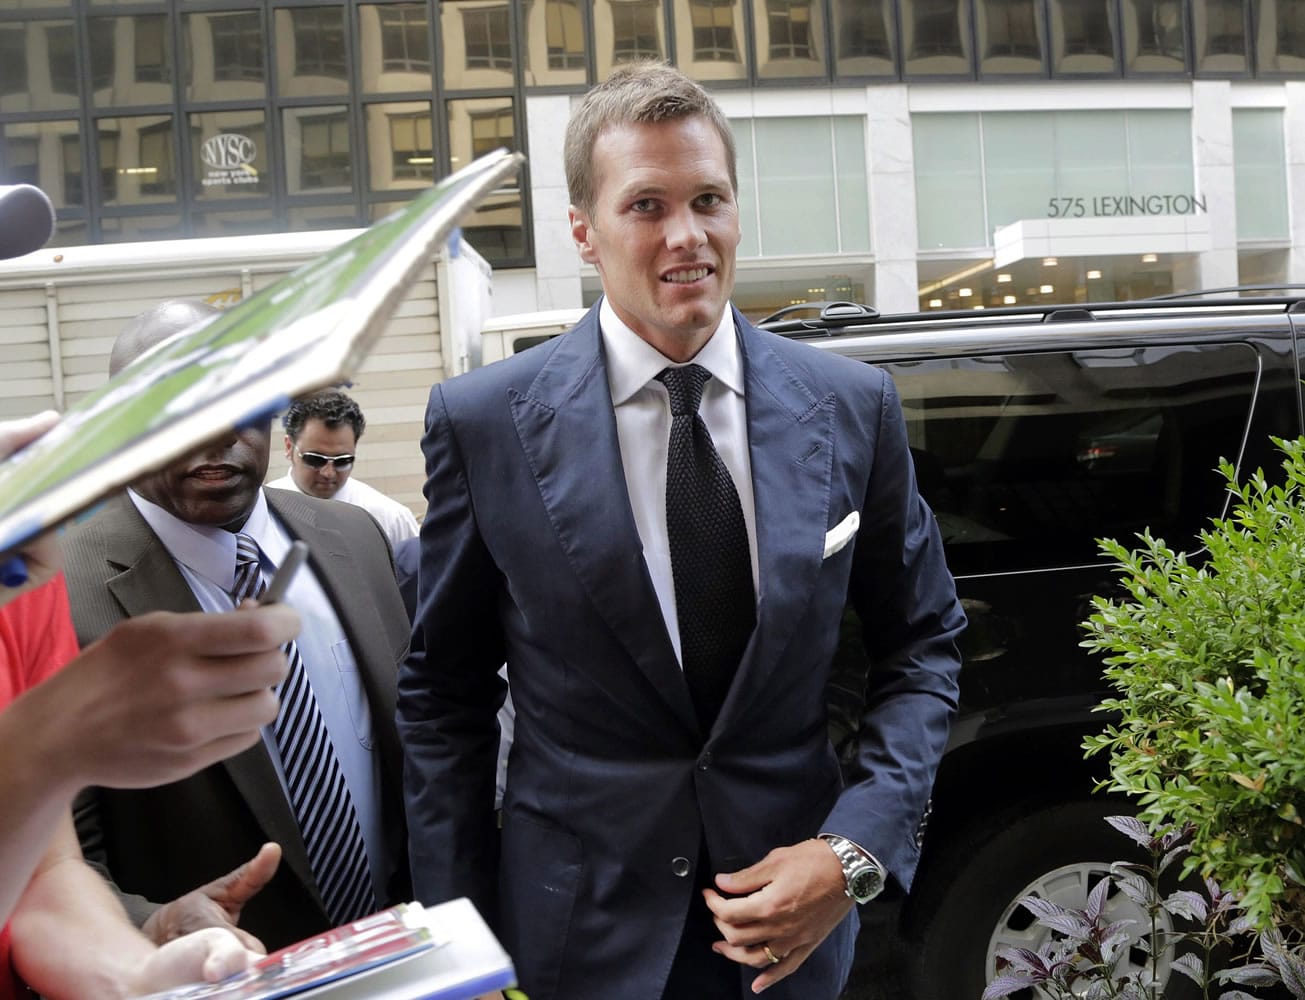 New England Patriot's quarterback Tom Brady arrives for his June appeal hearing at NFL headquarters in New York.